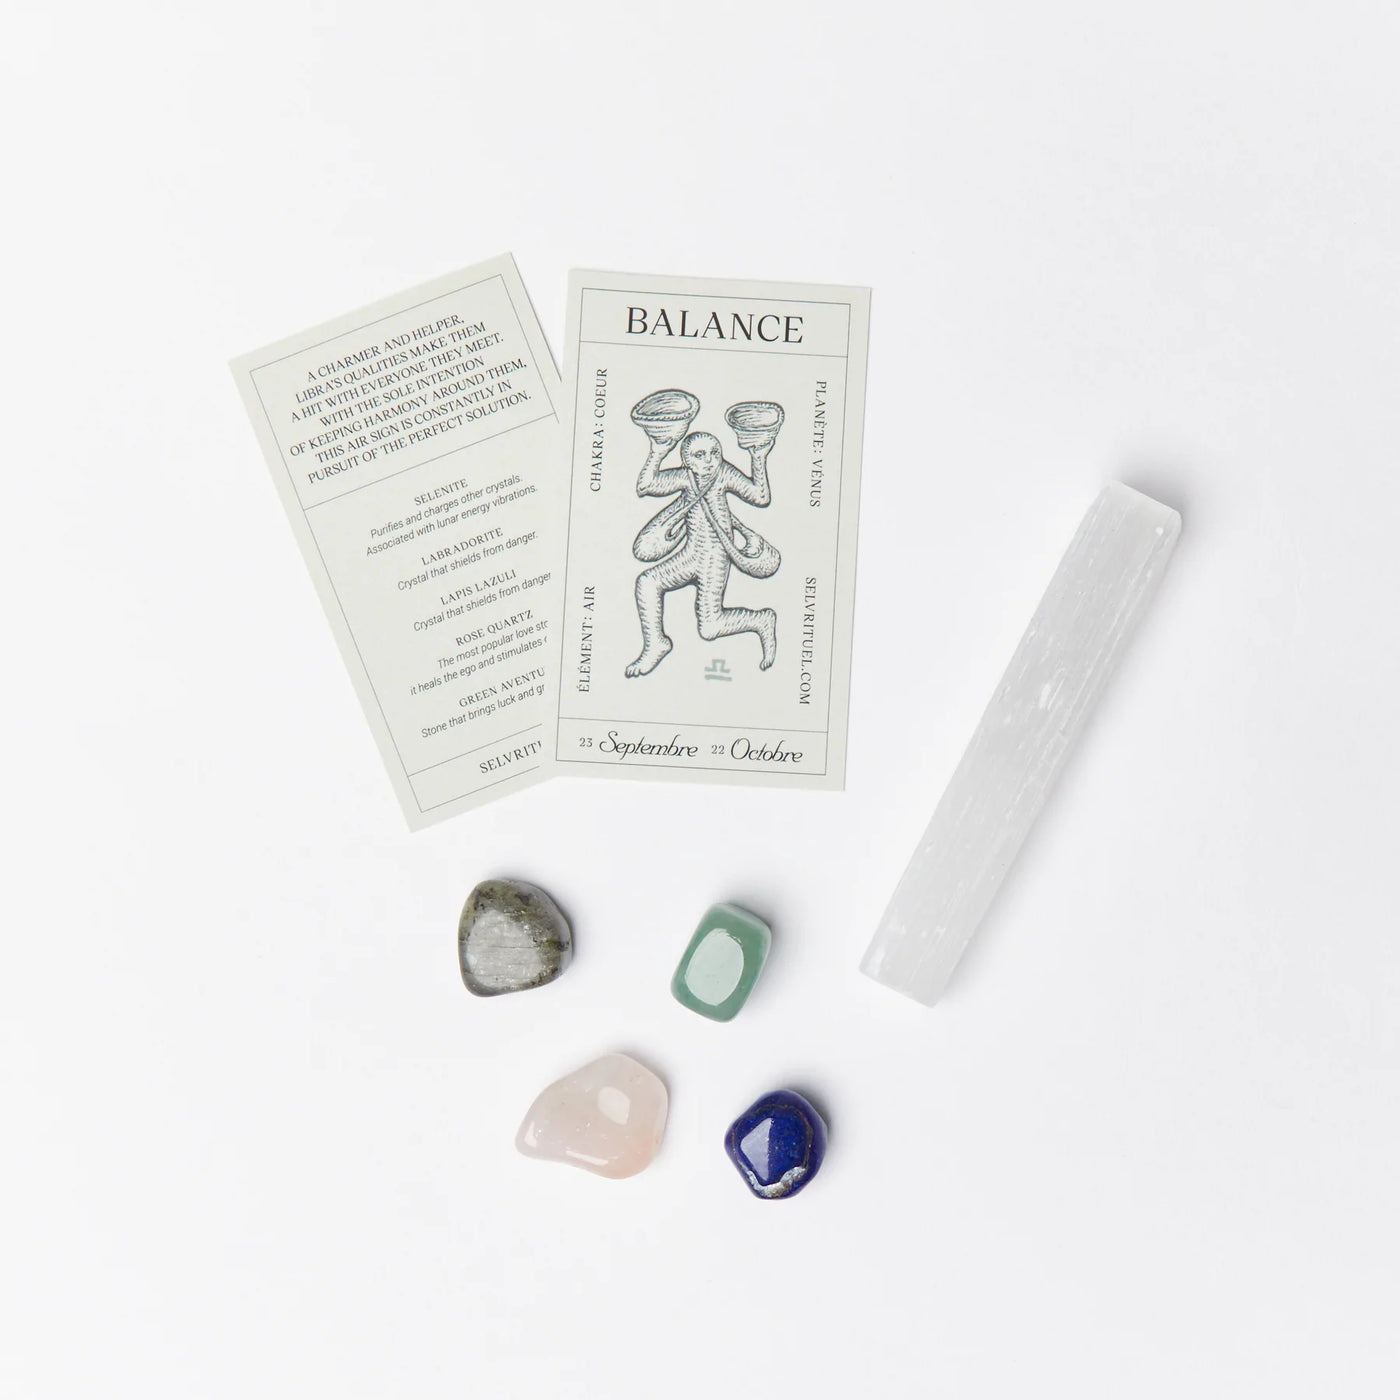 Zodiac Crystal Set with 5 special crystals for your zodiac sign. Comes in a gift bag with a card sharing your zodiac characteristics